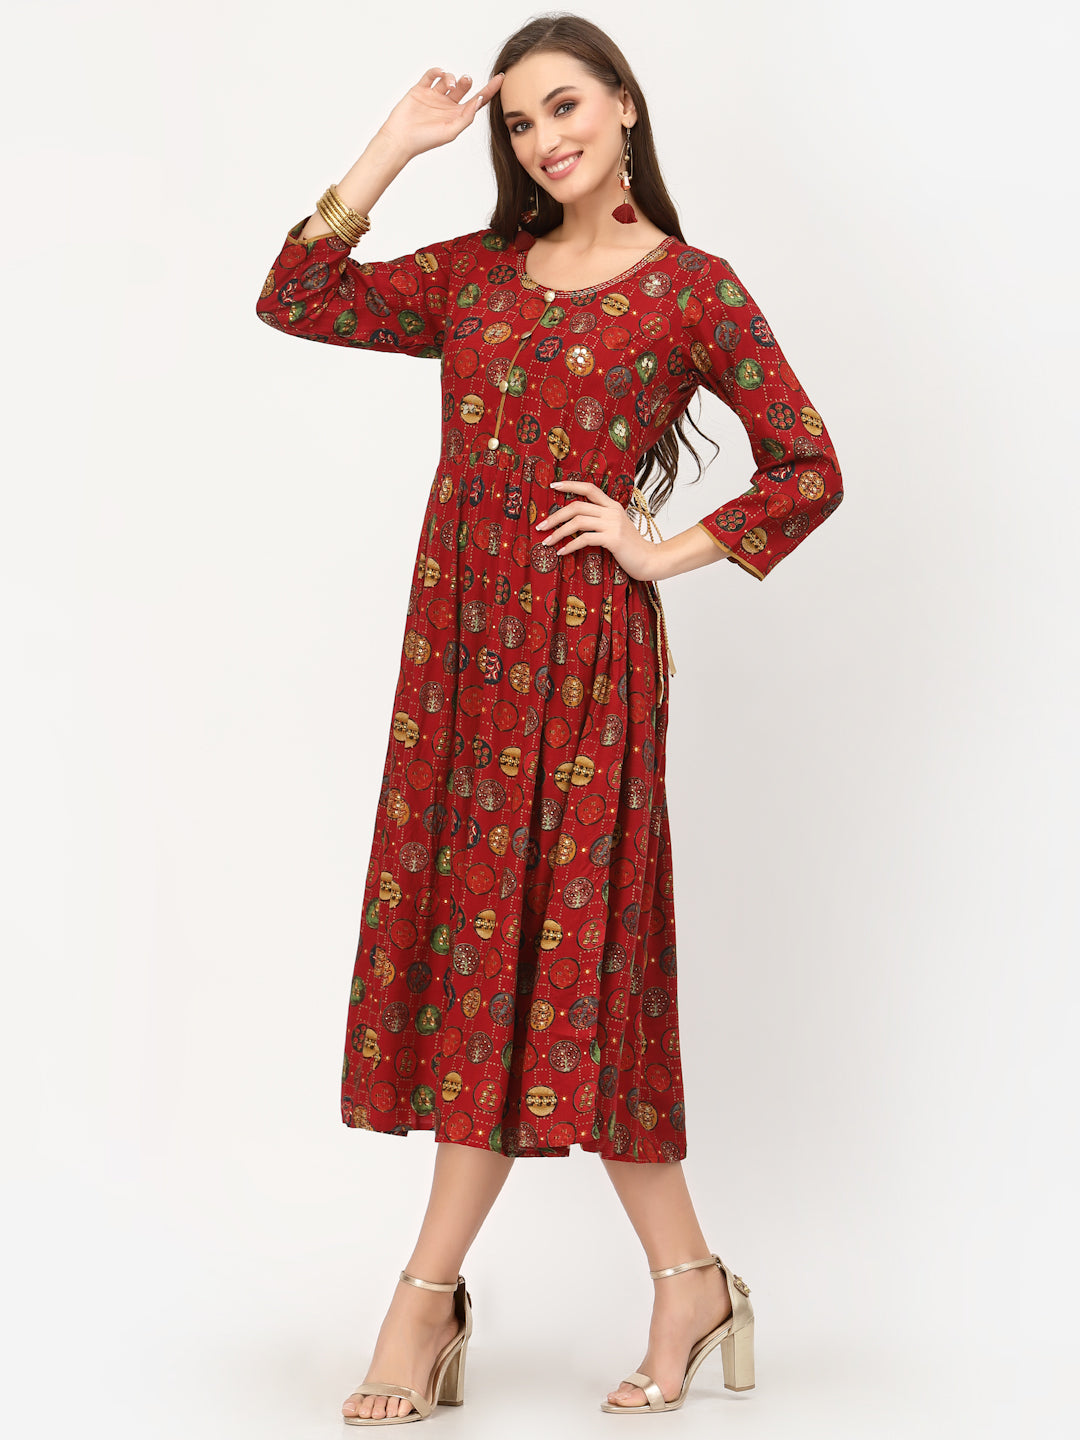 Red Fit & Flared Printed Dress - ARH333RD